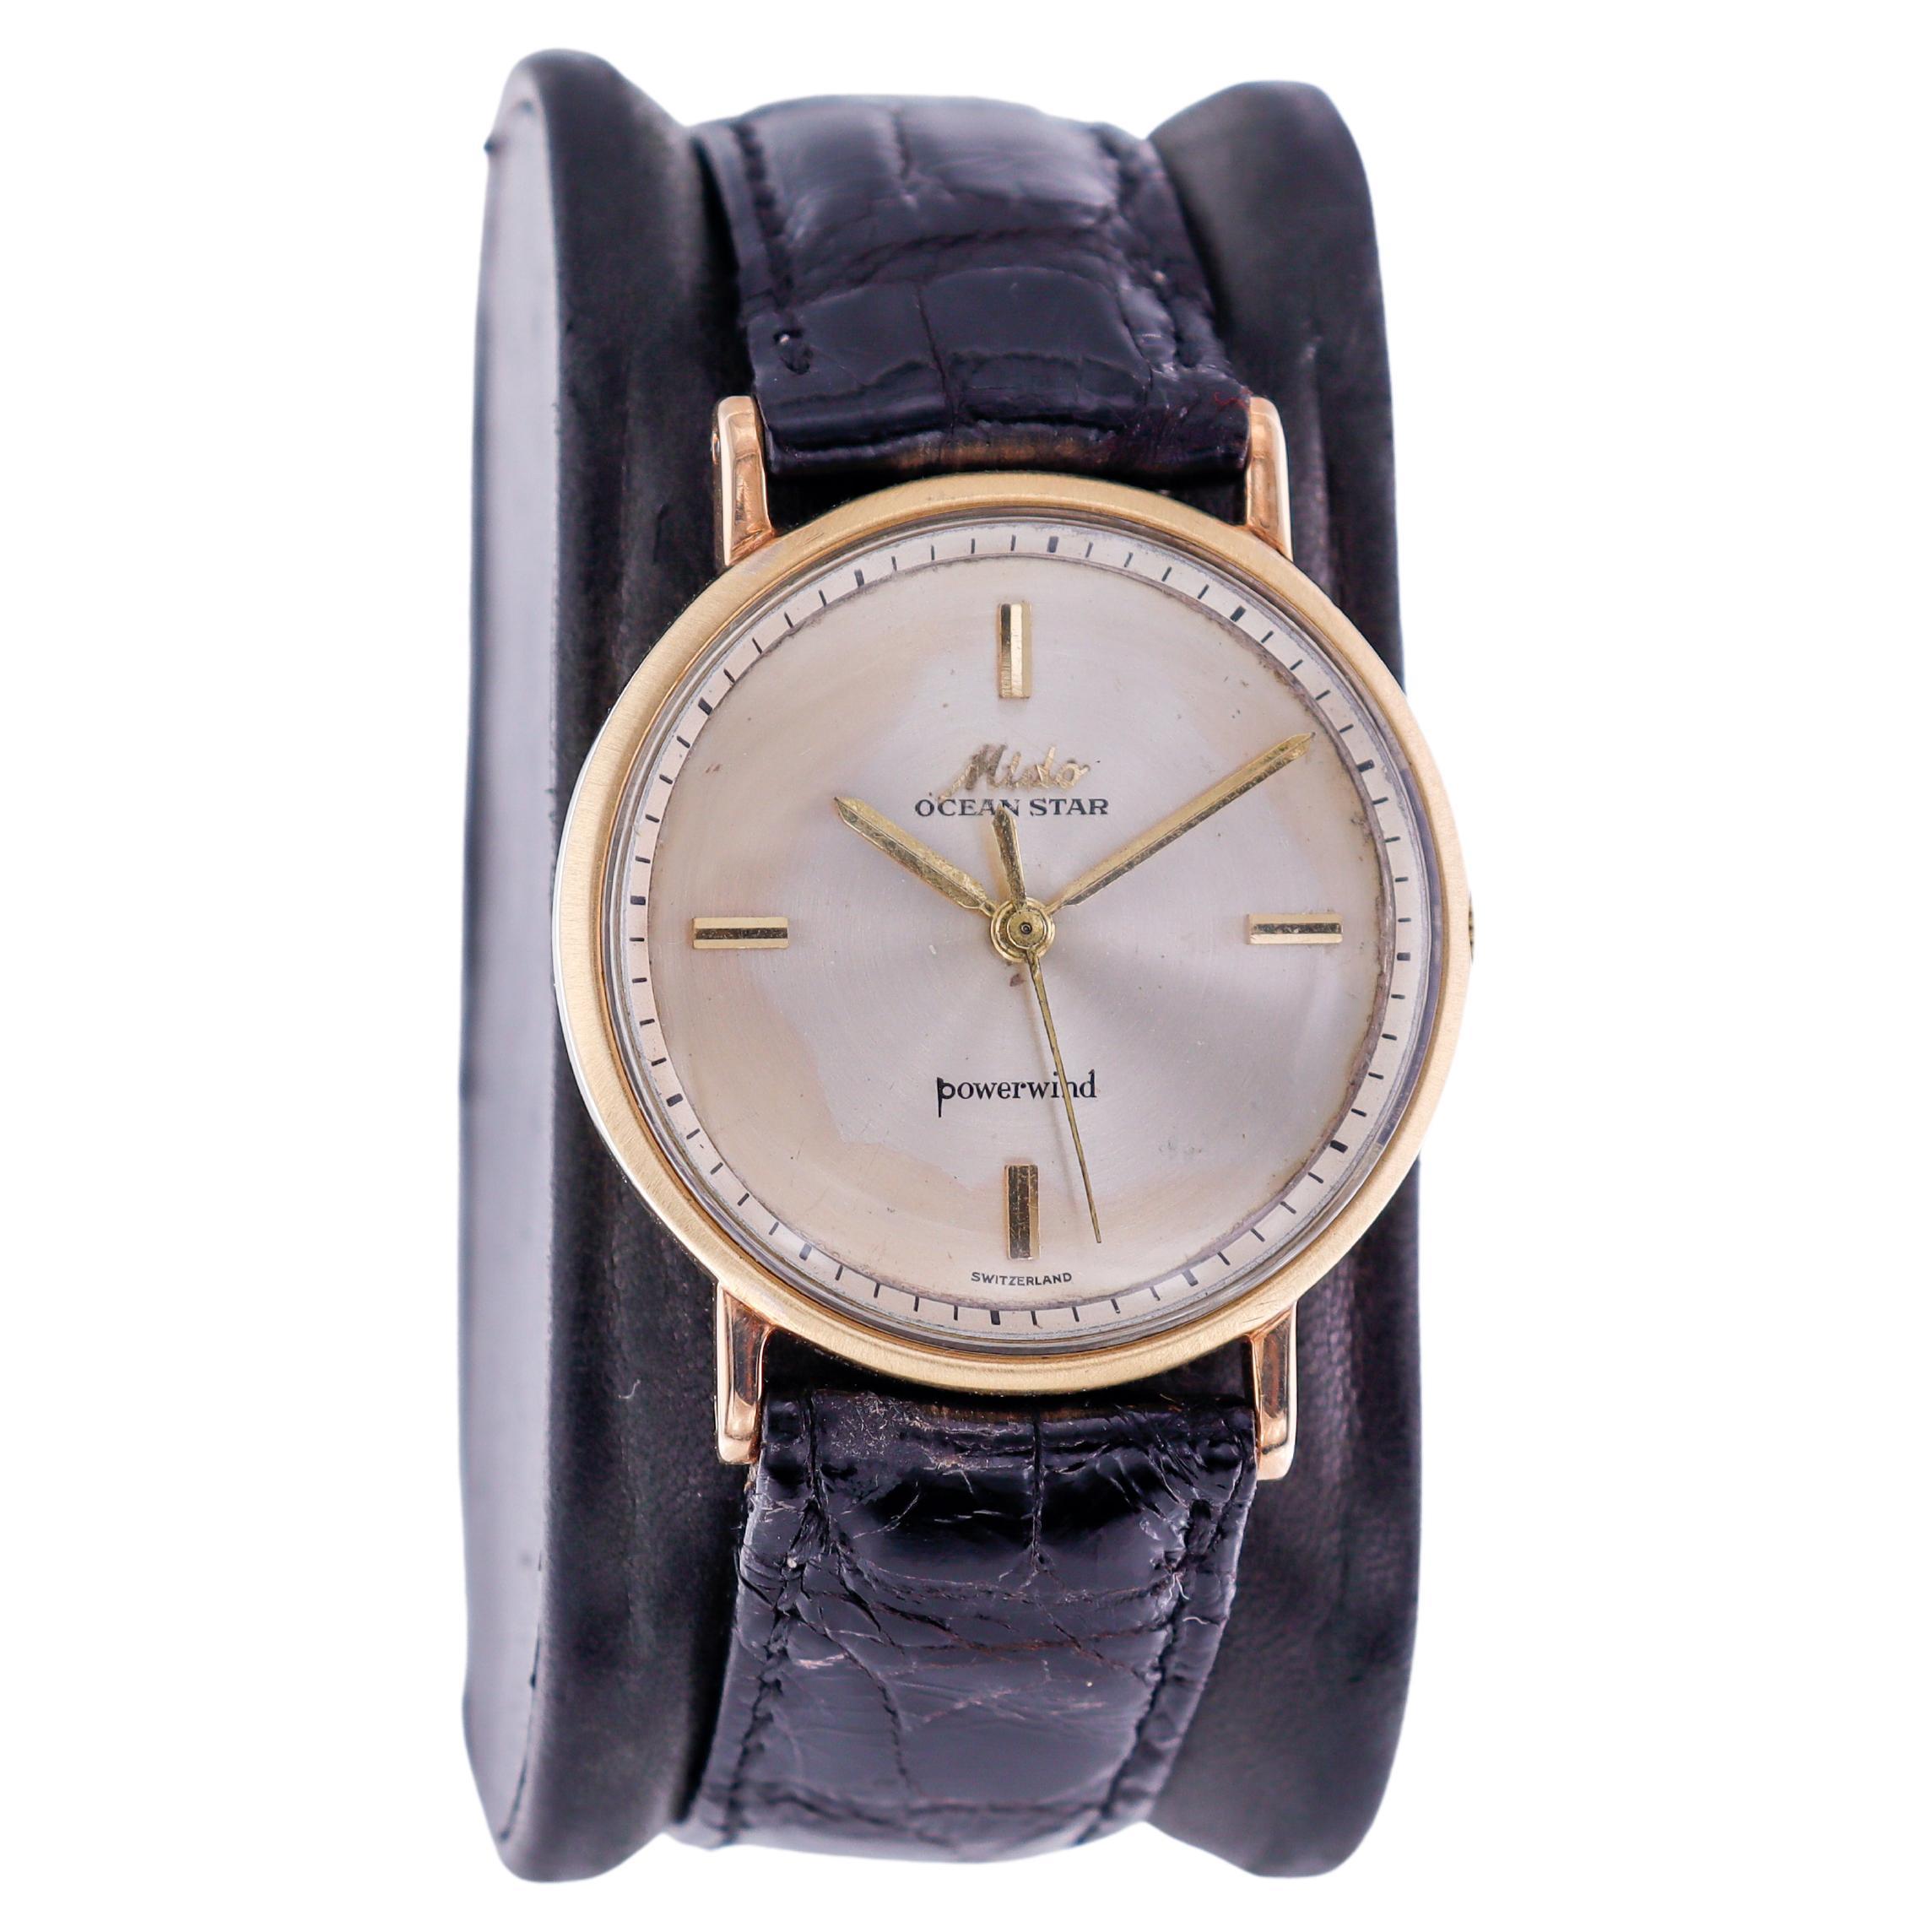 FACTORY / HOUSE: Mido Watch Company
STYLE / REFERENCE: Ocean Star 
METAL / MATERIAL: 14Kt Yellow Gold
DIMENSIONS: Length 39mm X  Diameter 32mm
CIRCA: 1950's
MOVEMENT / CALIBER: Power Winding / 17 Jewels 
DIAL / HANDS: Original Silvered with Baton